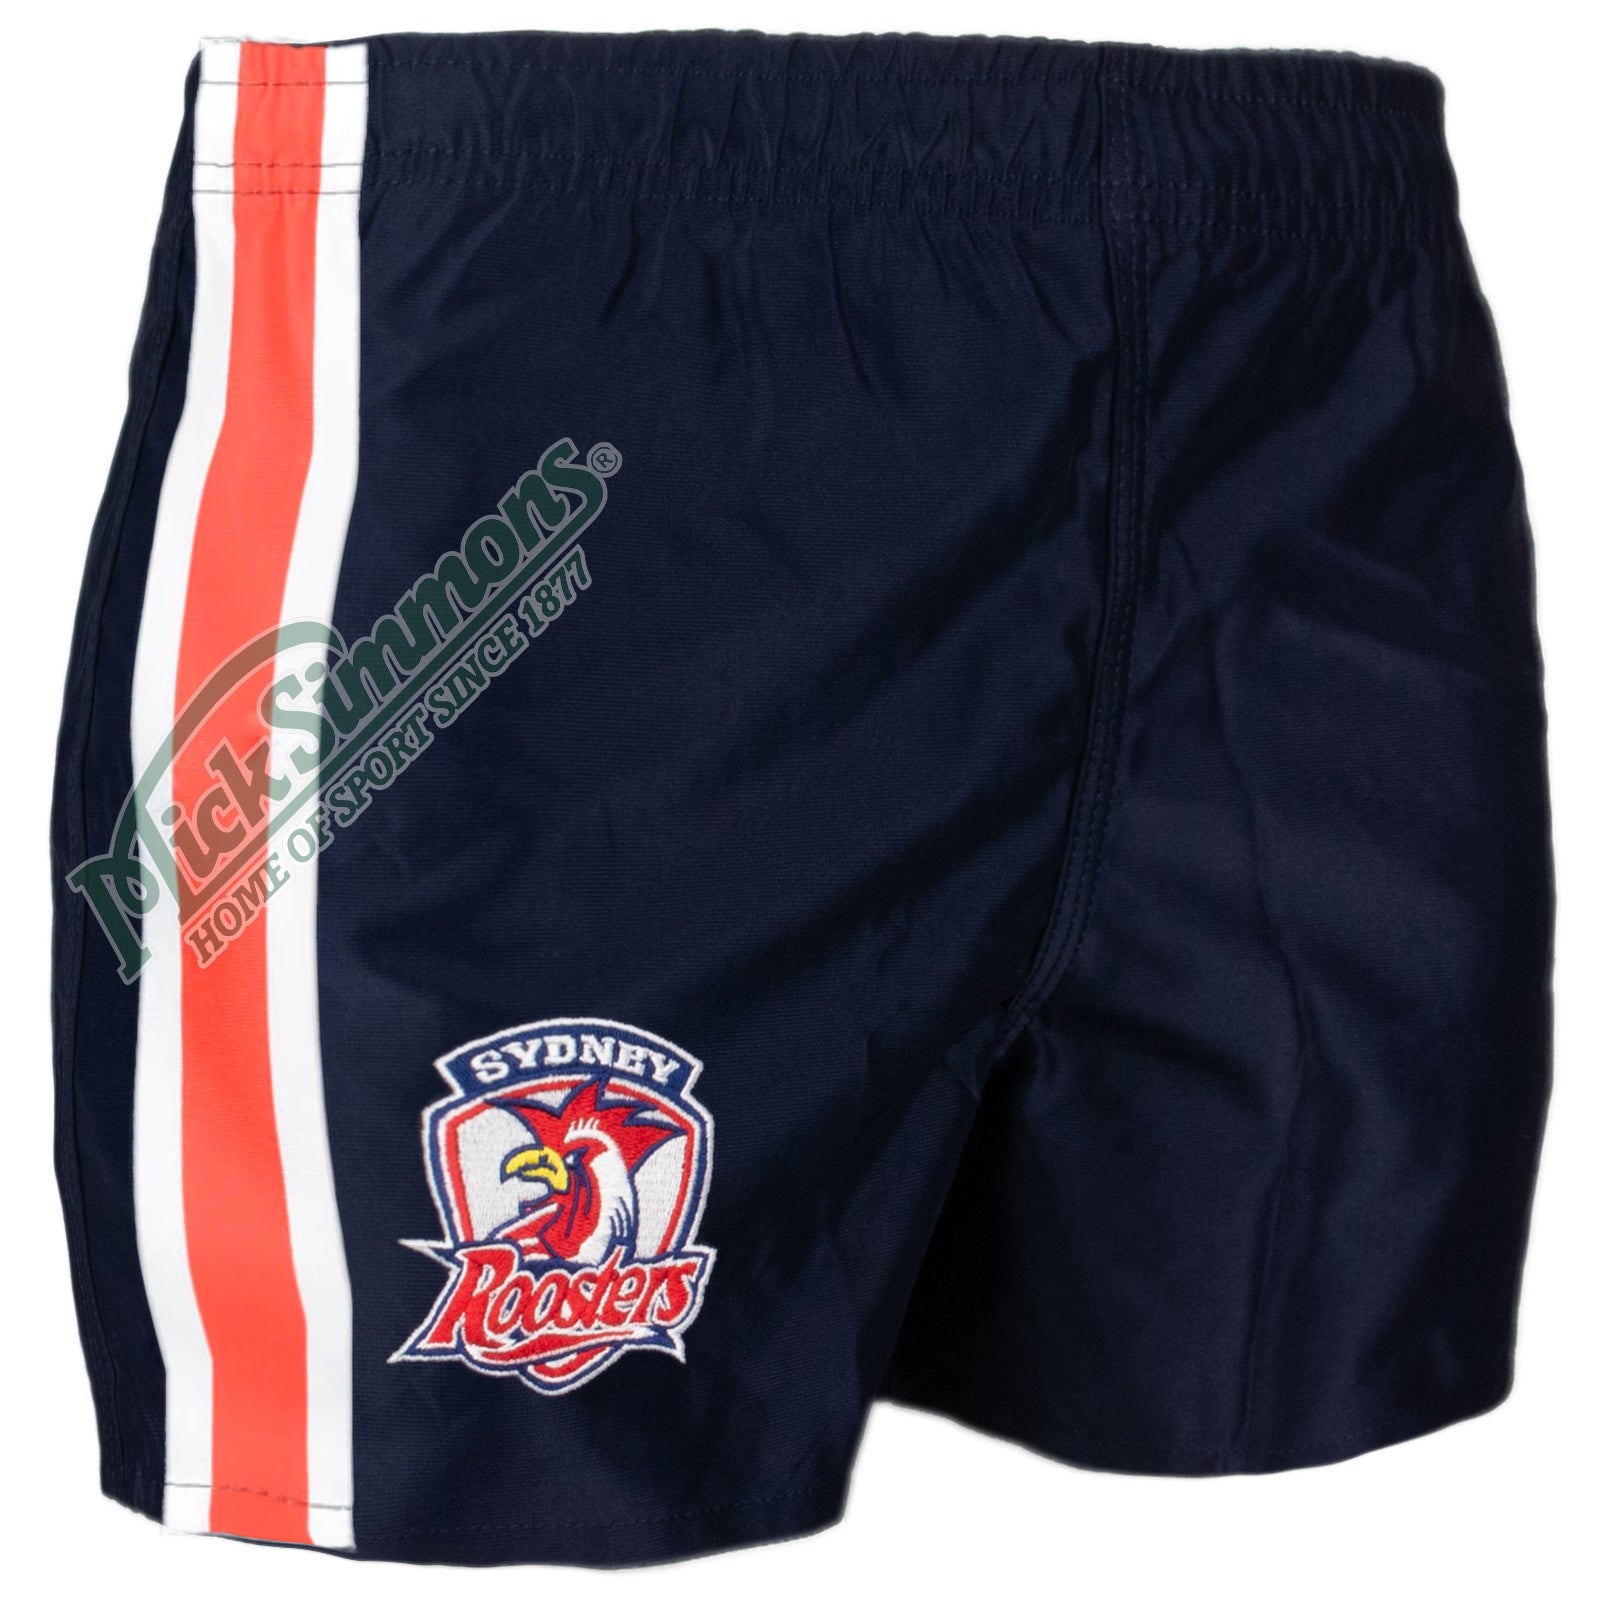 Sydney Roosters NRL Supporter Rugby League Footy Mens Shorts Mick Simmons Sport